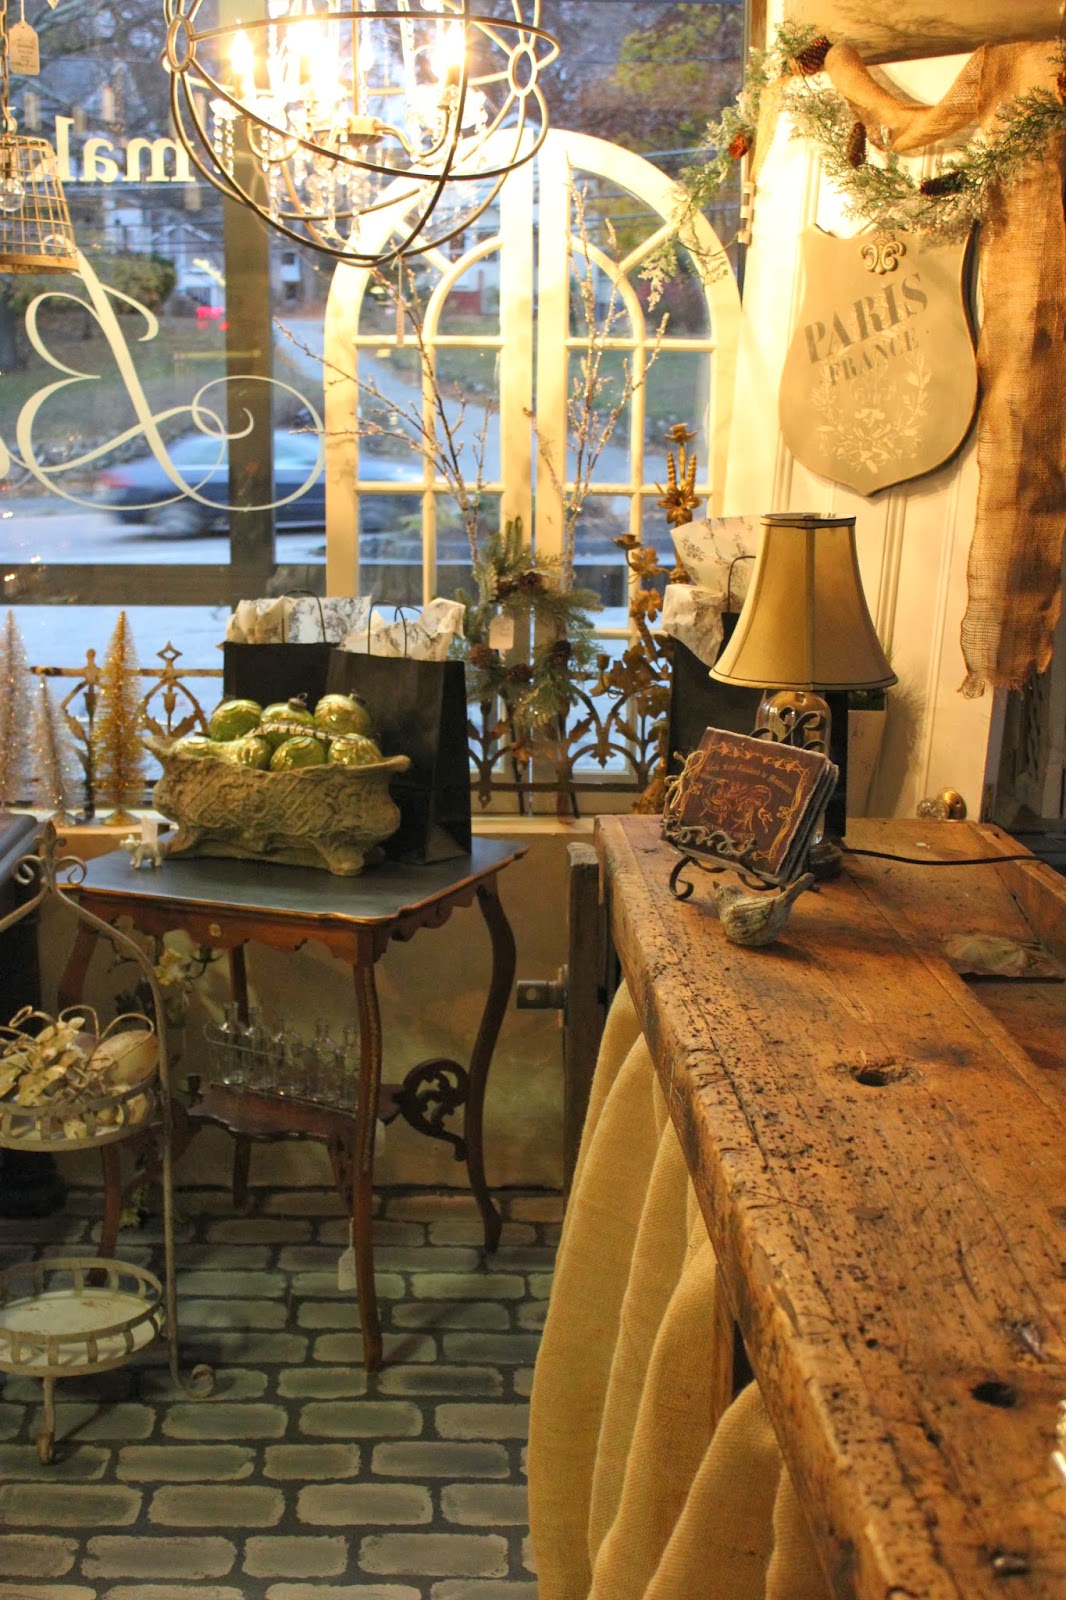 Maison Decor: Rustic French Home Accents in the shop